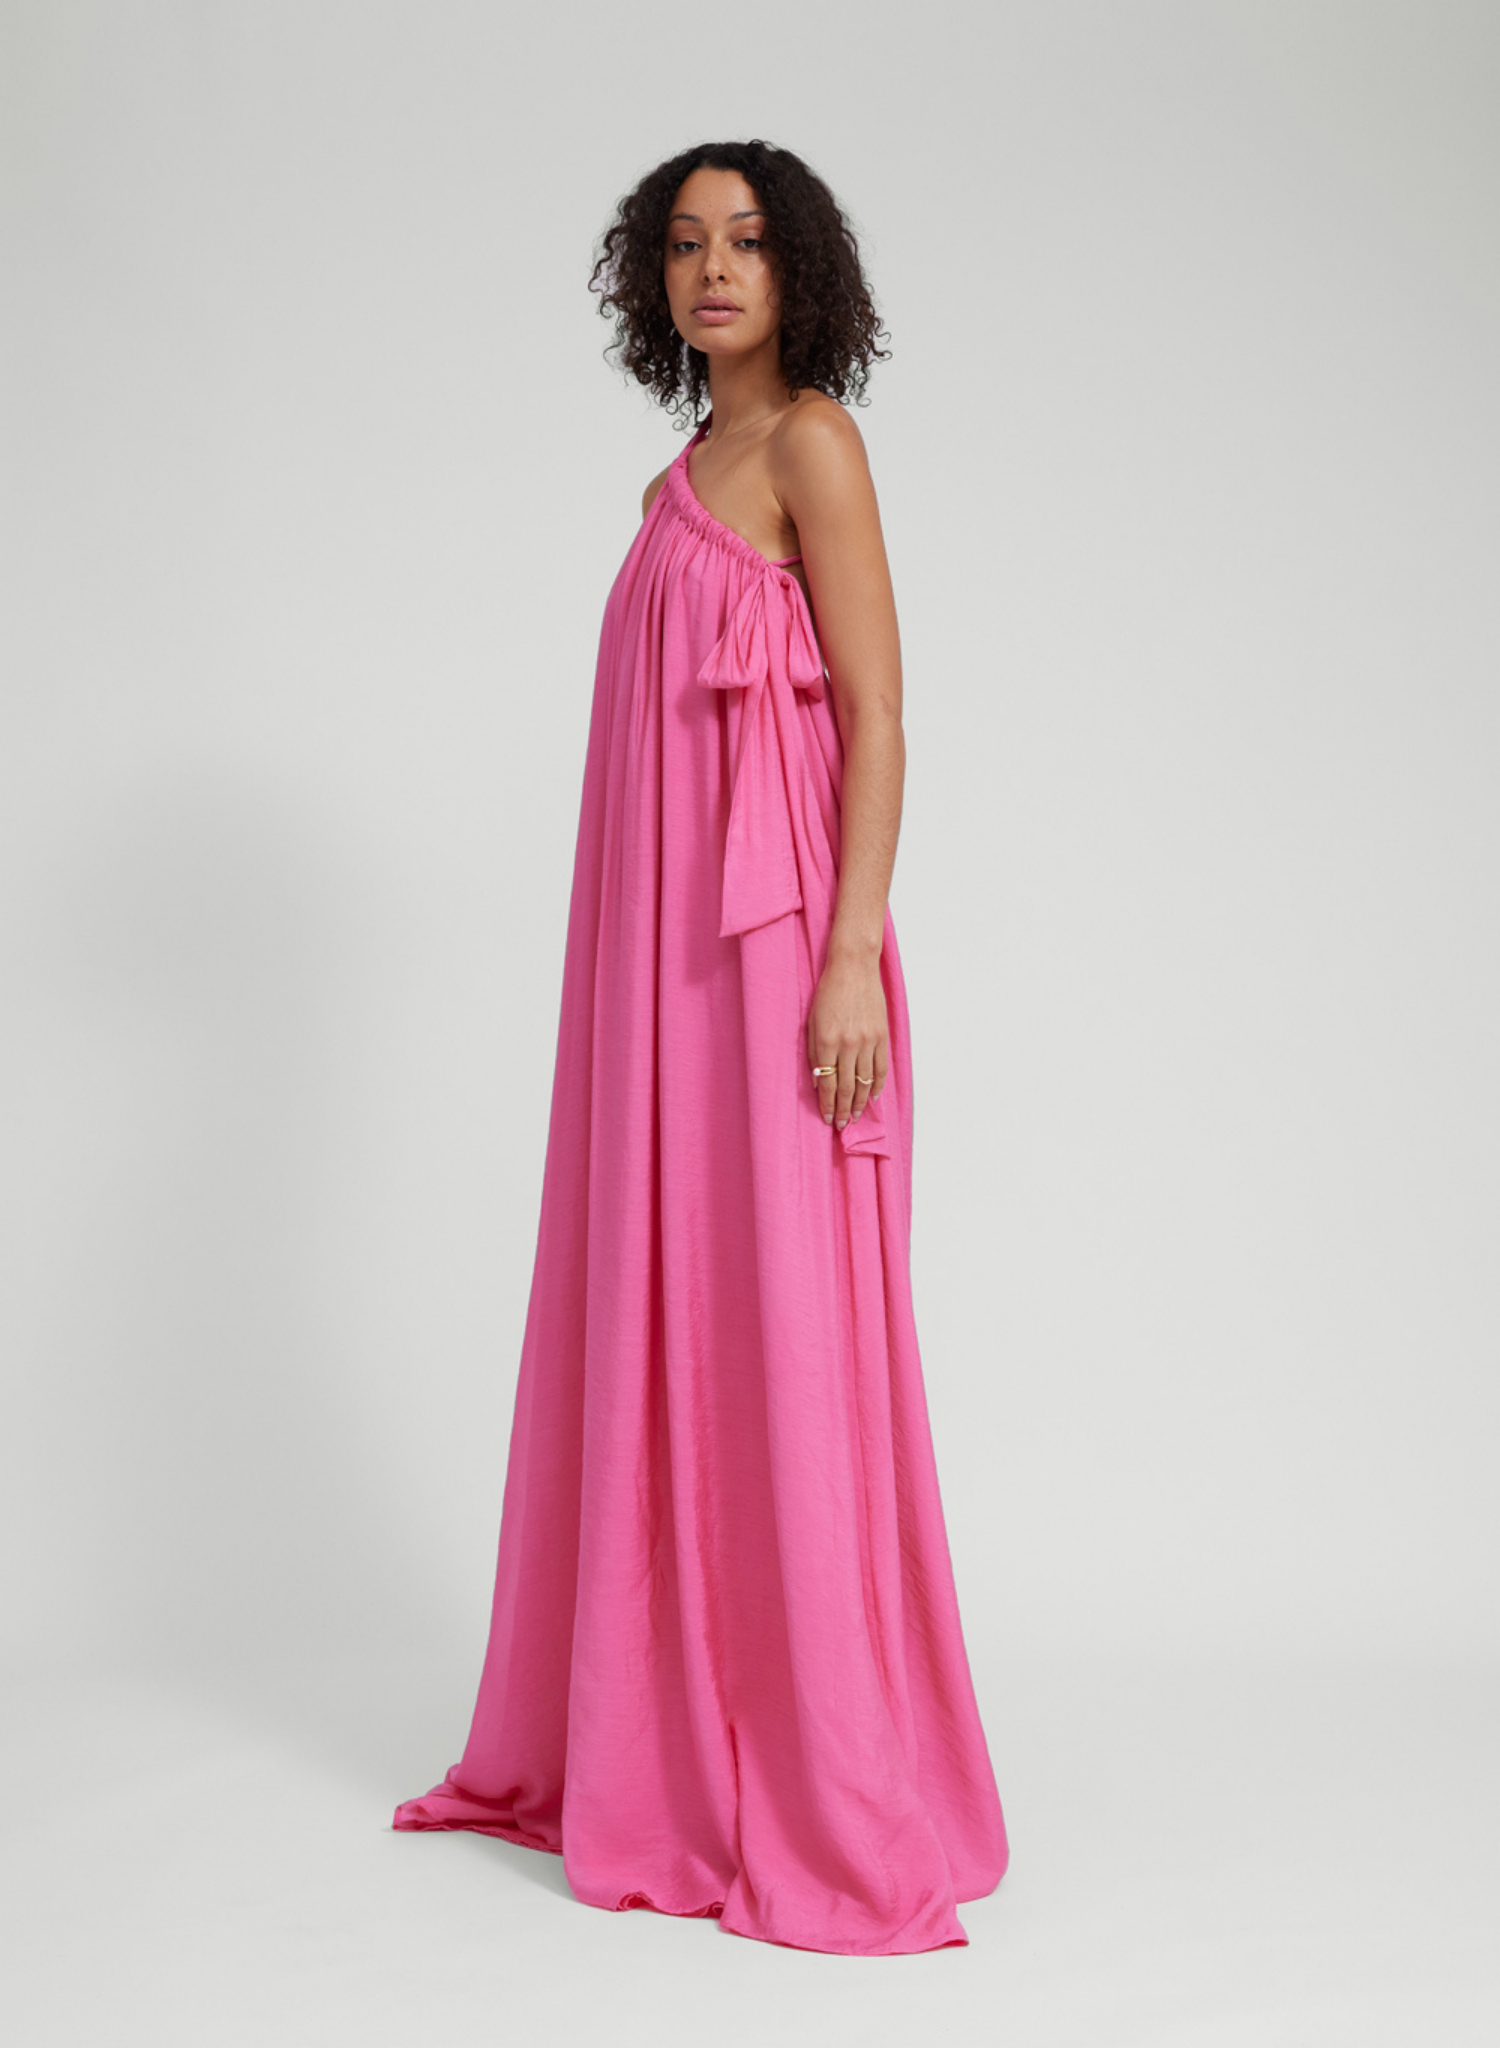 Floor length lightweight gown Adjustable strapping detail with ties Dress features 3 layers of main sheer fabric, to create pastel opaque appearance. Low back Fit adjustability through halter and shoulder strapping